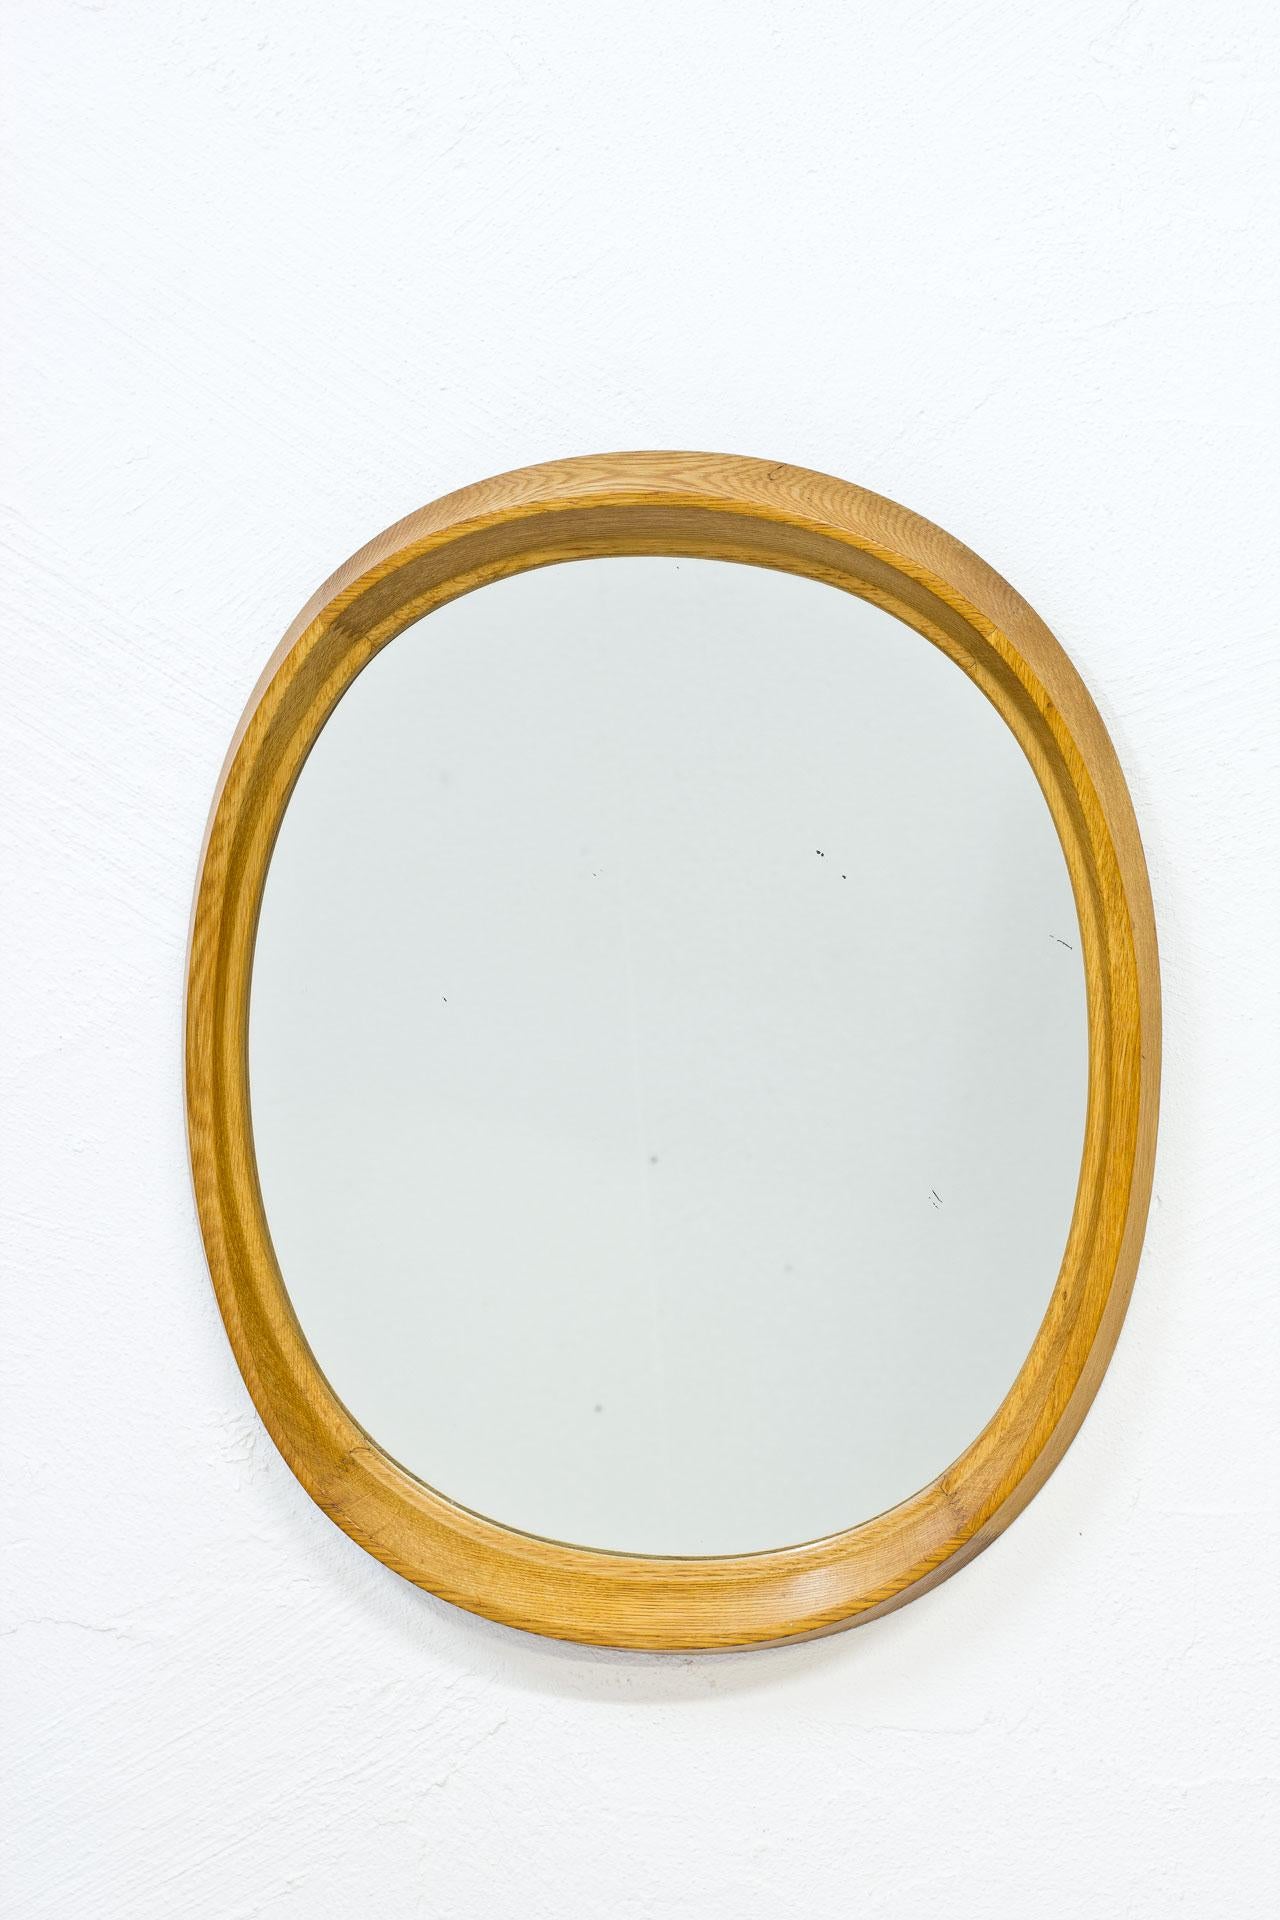 Oval shaped oak wall mirror, manufactured by Fröseke, AB Nybrofabriken during the 1950s in Sweden. Labeled in the back, model “Camilla”.